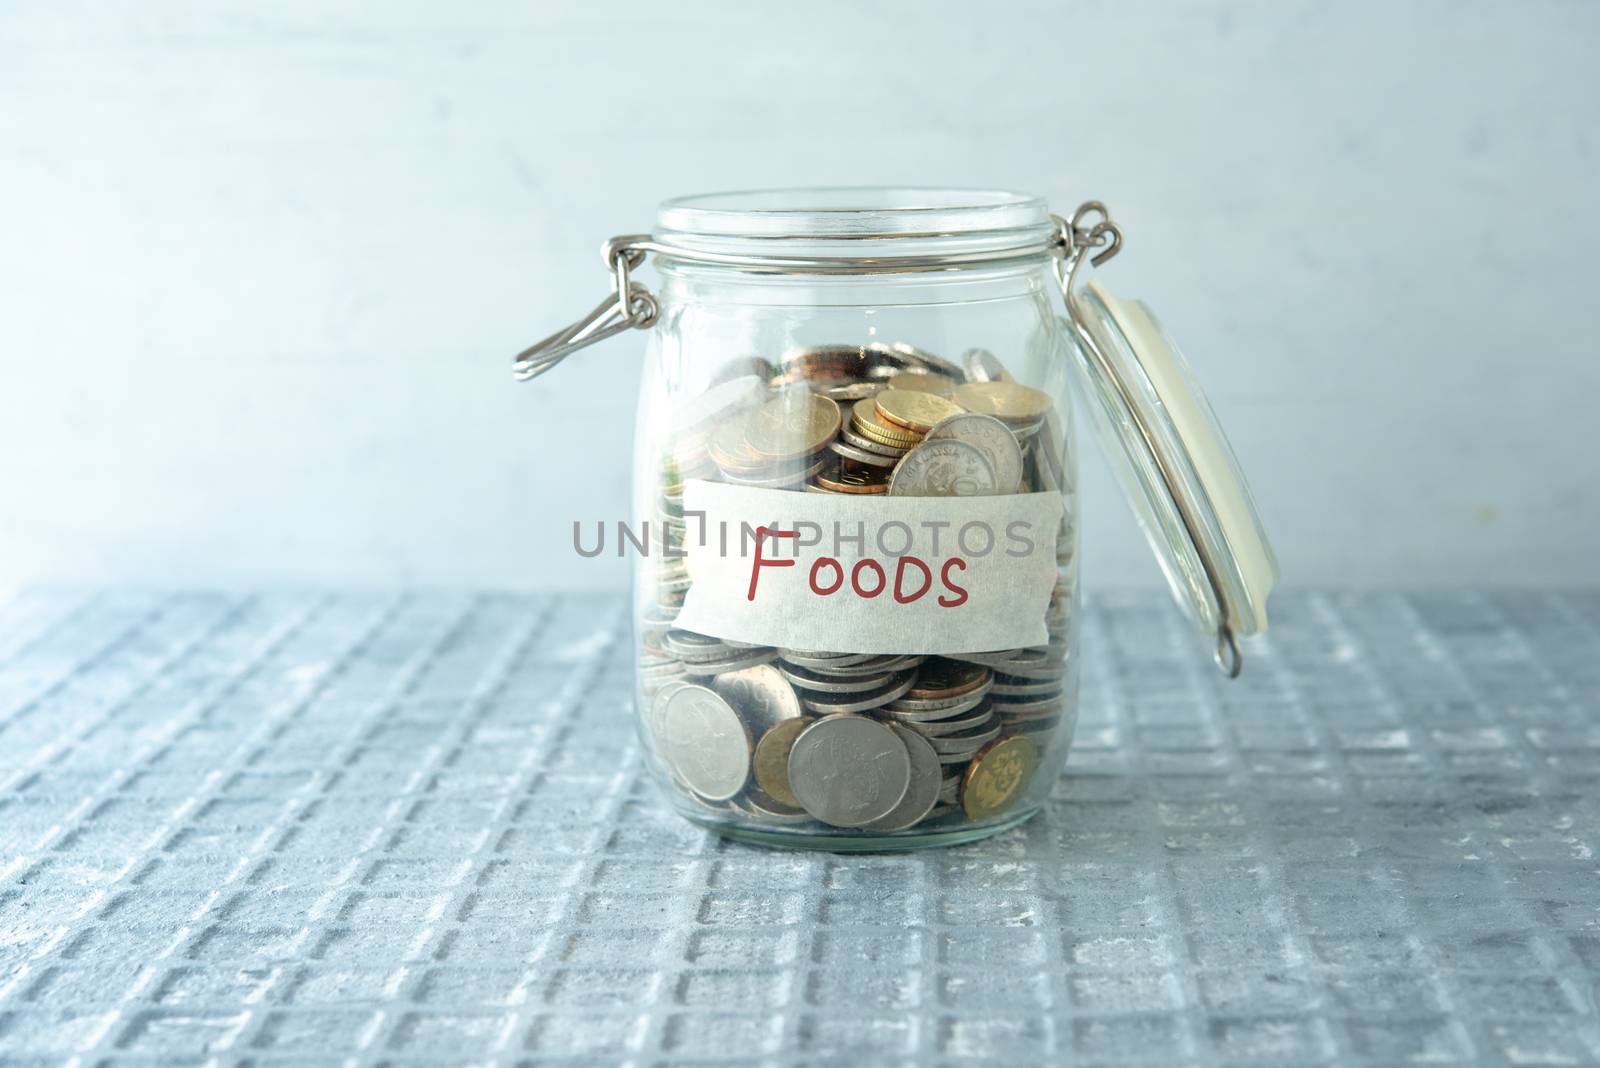 Coins in glass money jar with foods label, financial concept.